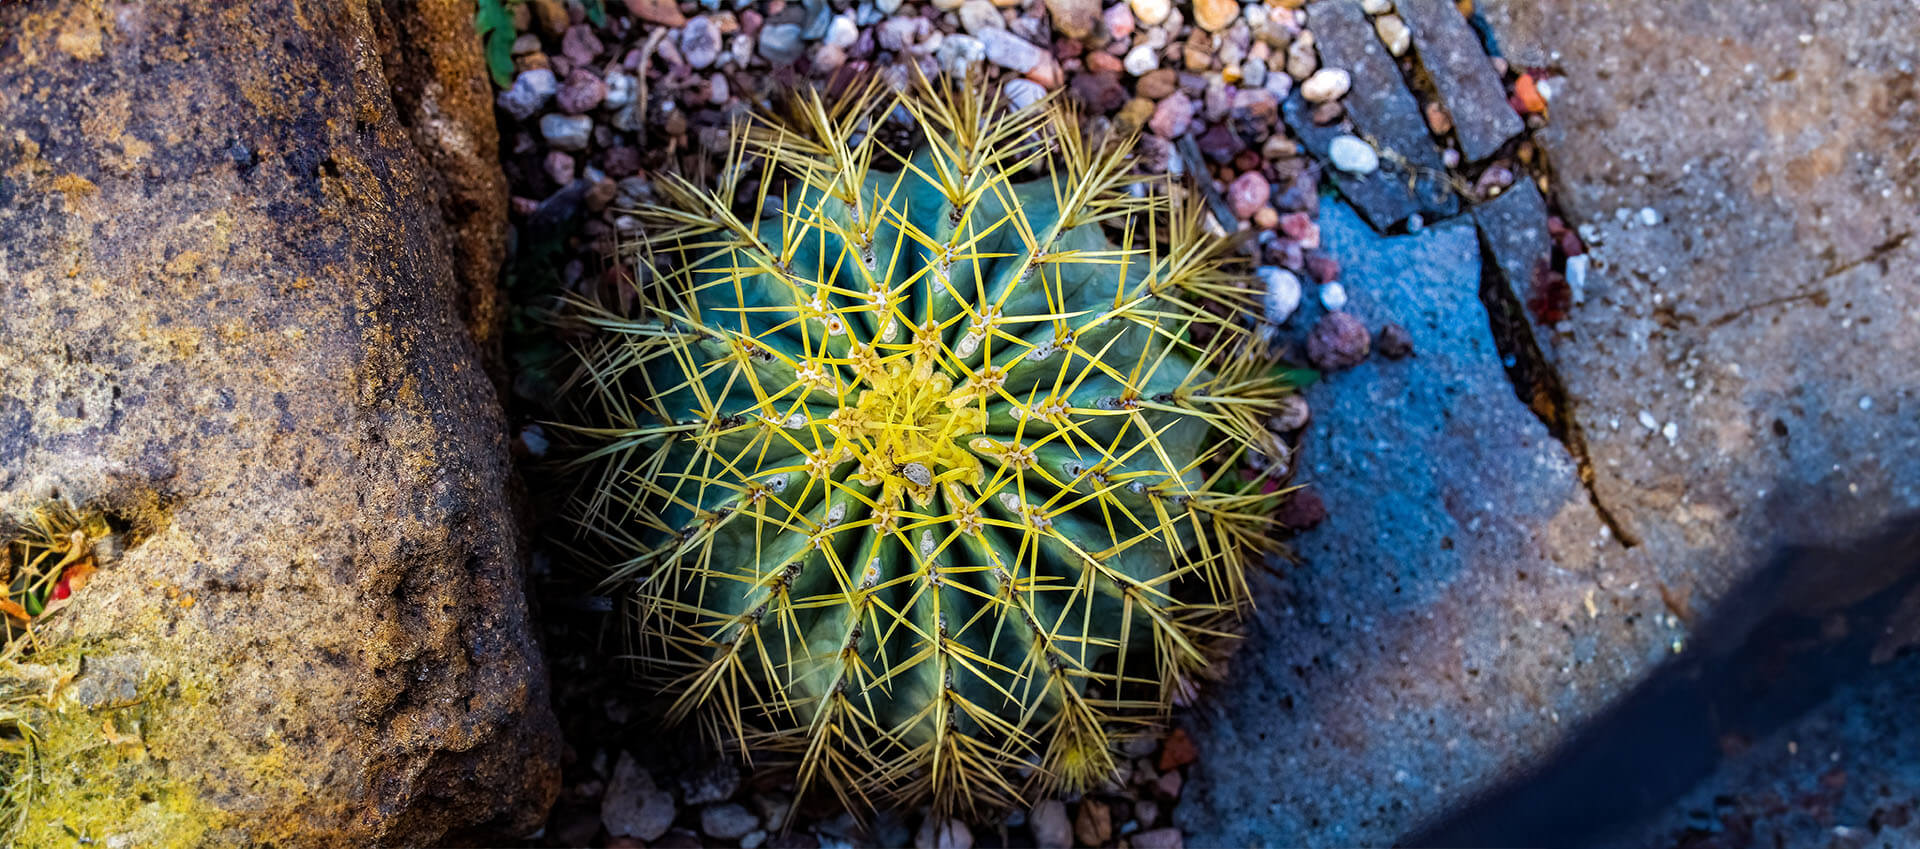 Prickly cactus growing from a crack in a rock. You may be tired of dealing with chronic pain alone. However, with a skilled online life coach you can begin to cope. Learn how coaching for chronic pain in Florida, Texas, statewide, and internationally may help.